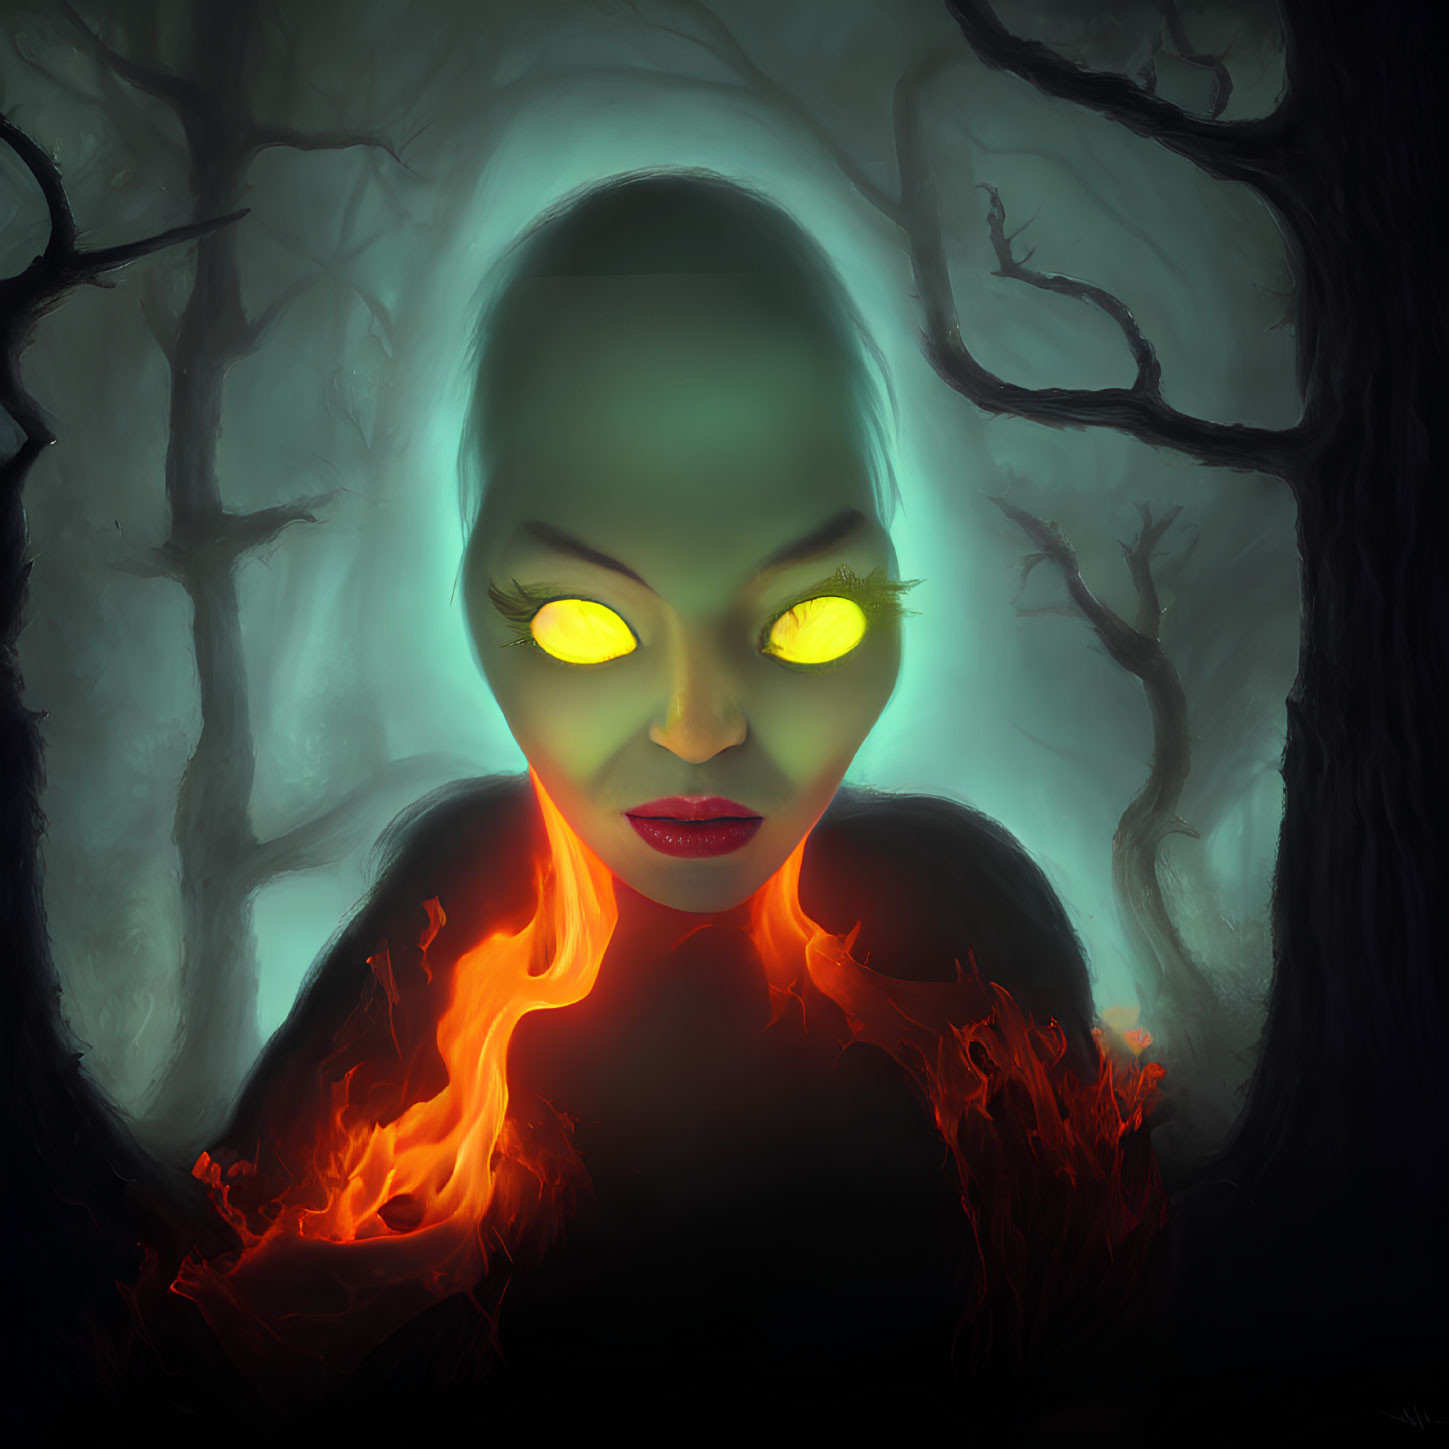 Mysterious figure with glowing eyes in dark forest